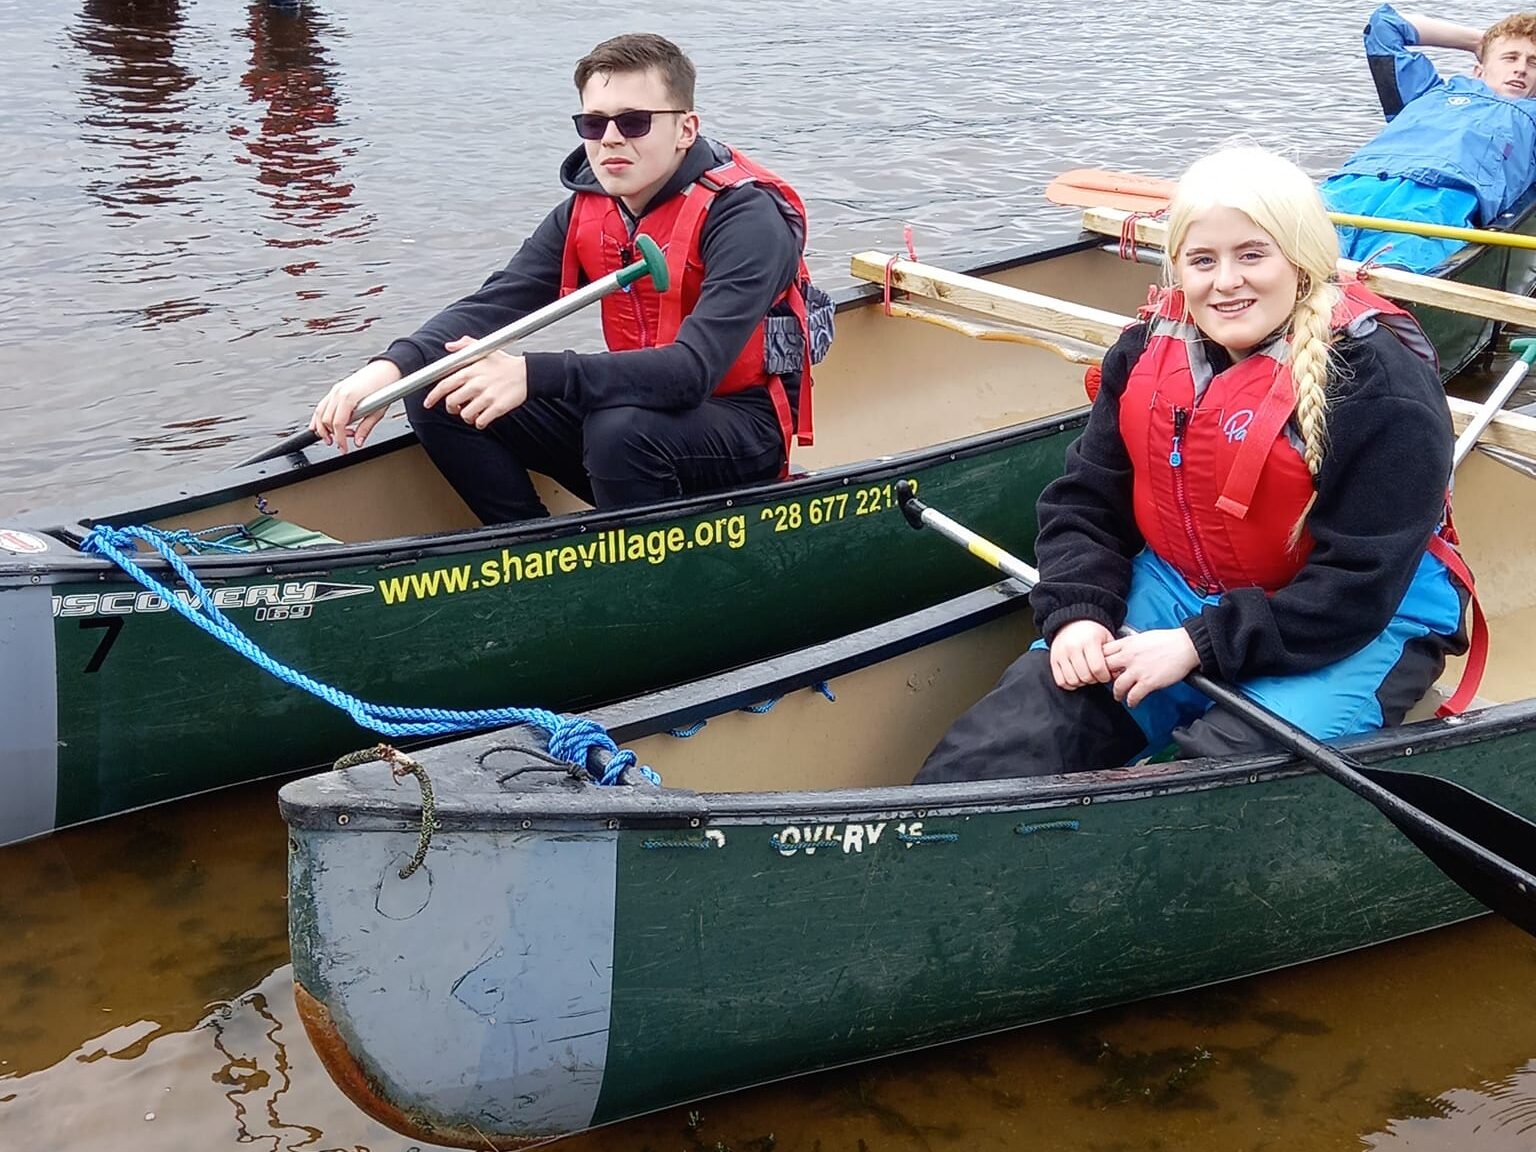 This image shows three teenagers in a canoe taking part in the Angel Eyes residential.